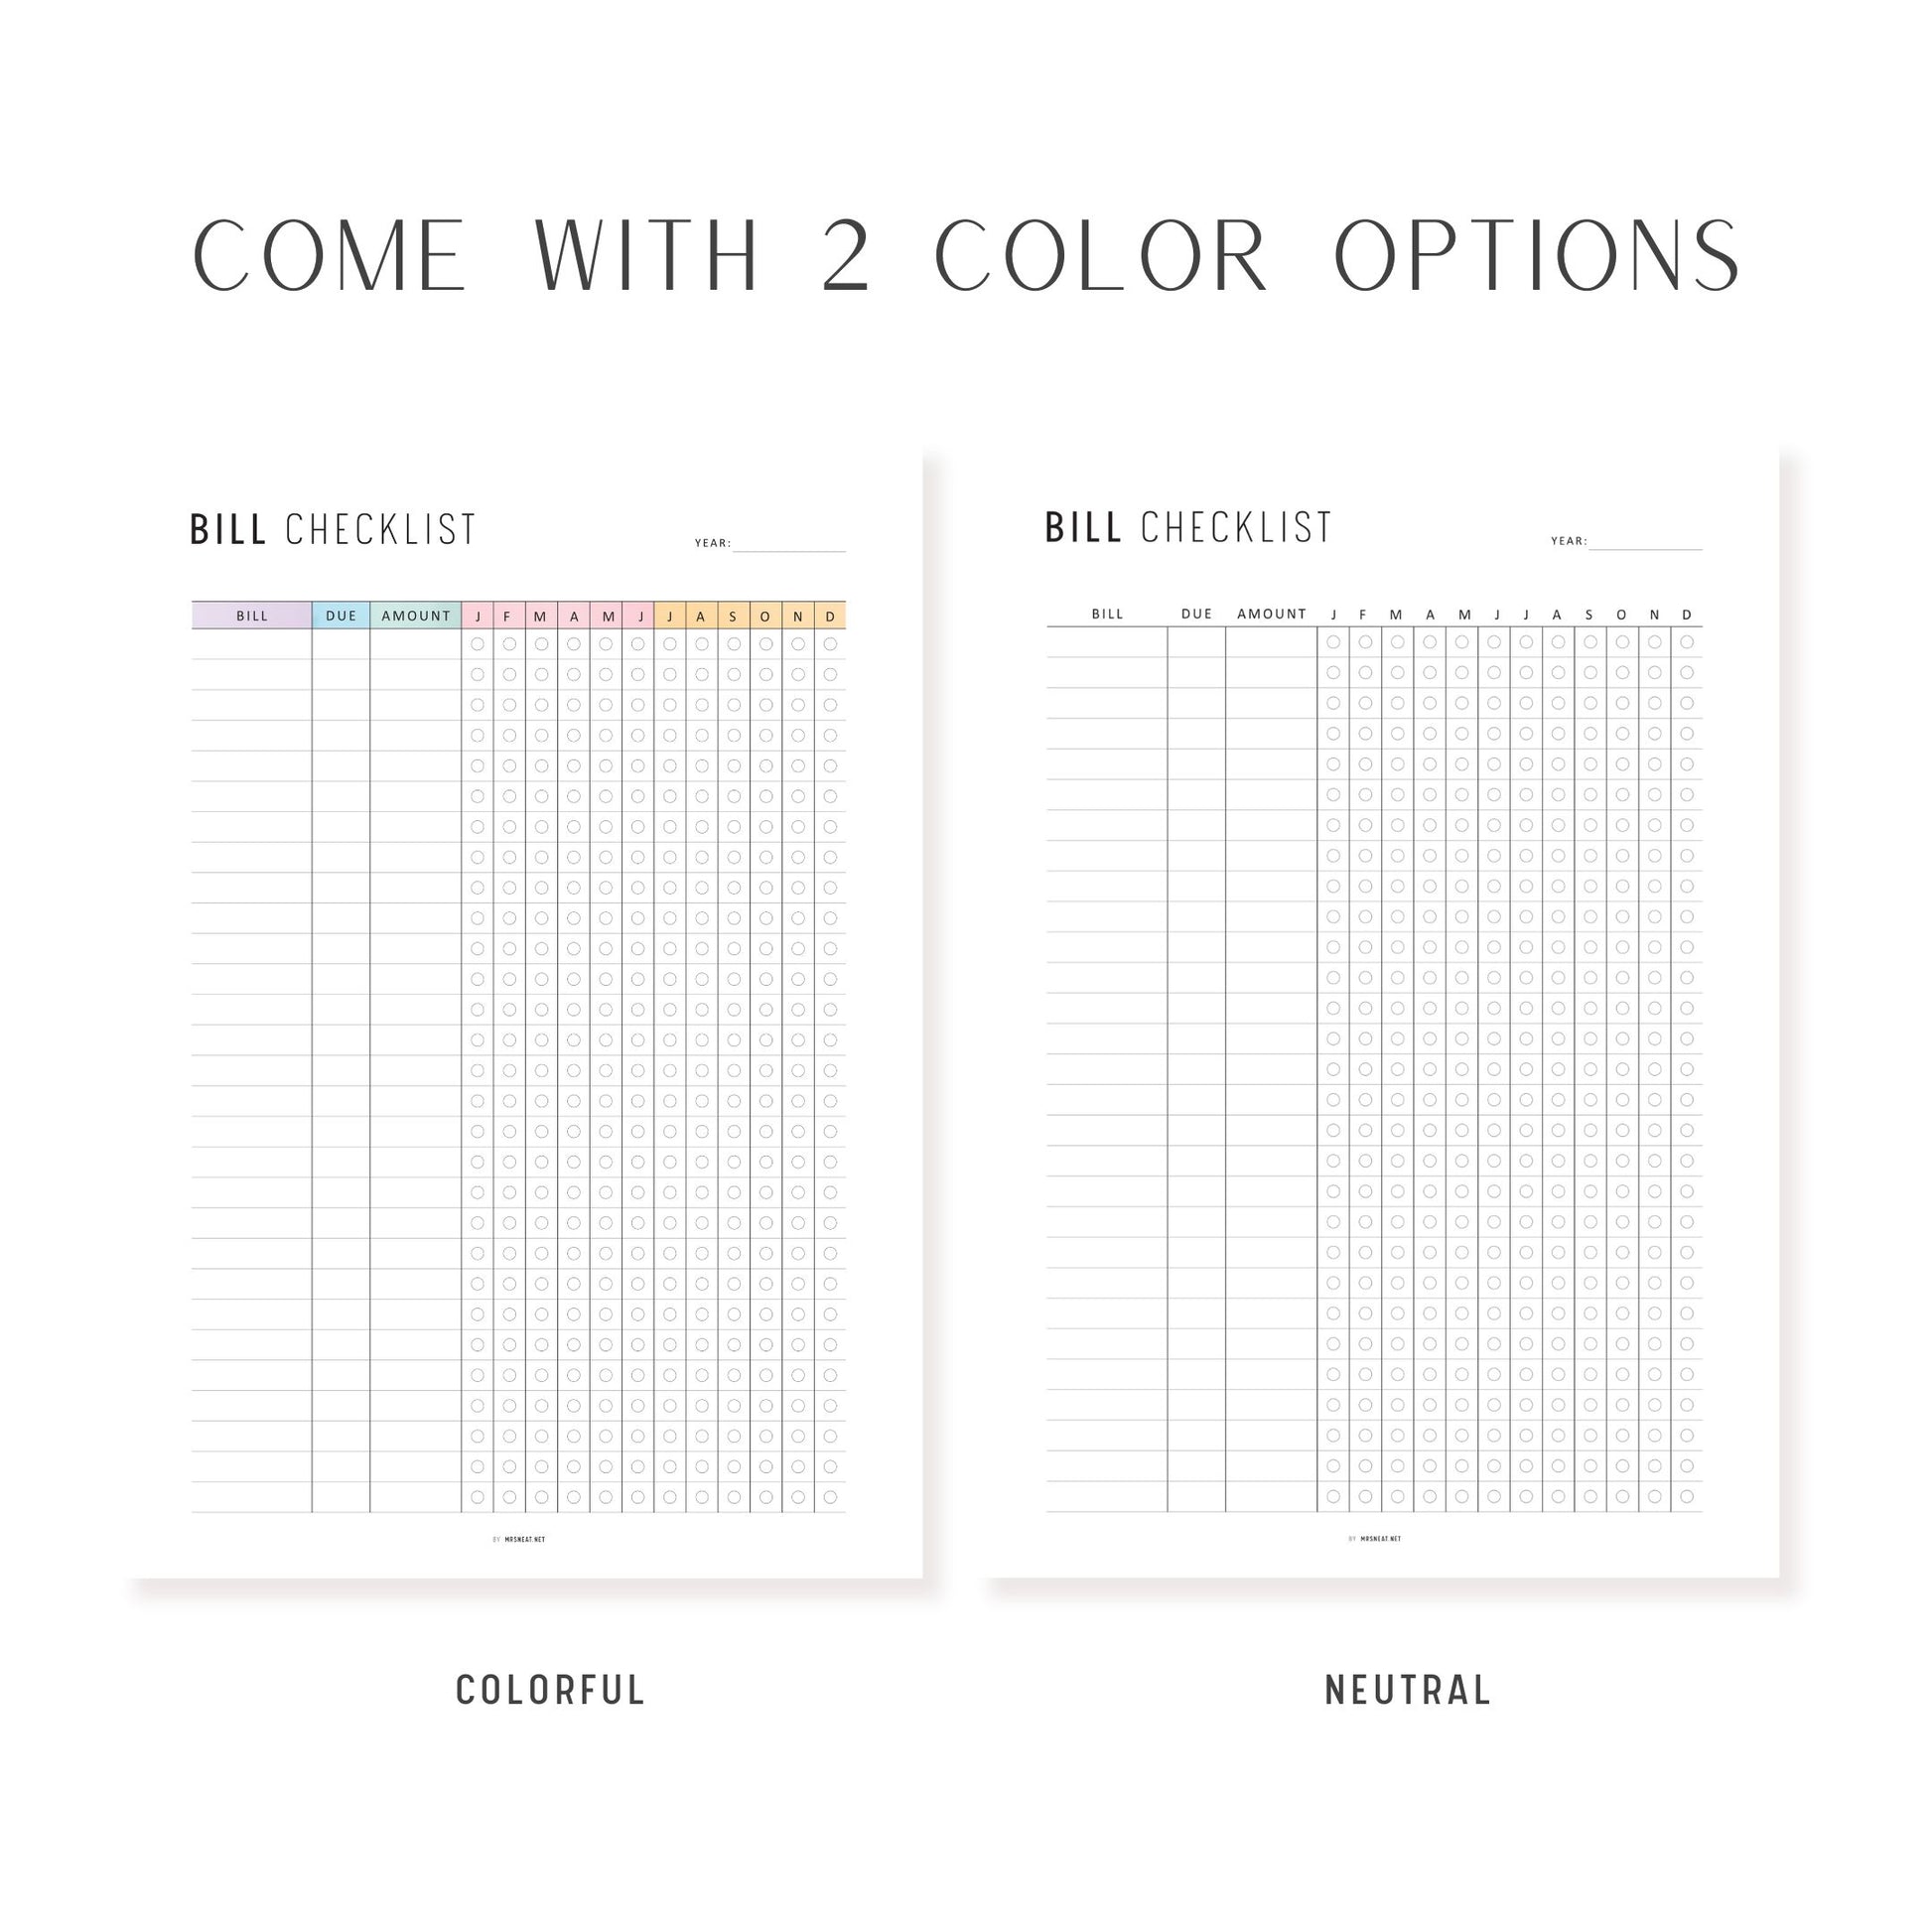 One Year Bill Checklist Printable, 12 Month Bill Payment Checklist, A4, A5, Letter, Half Letter, Minimalist & Colorful Page